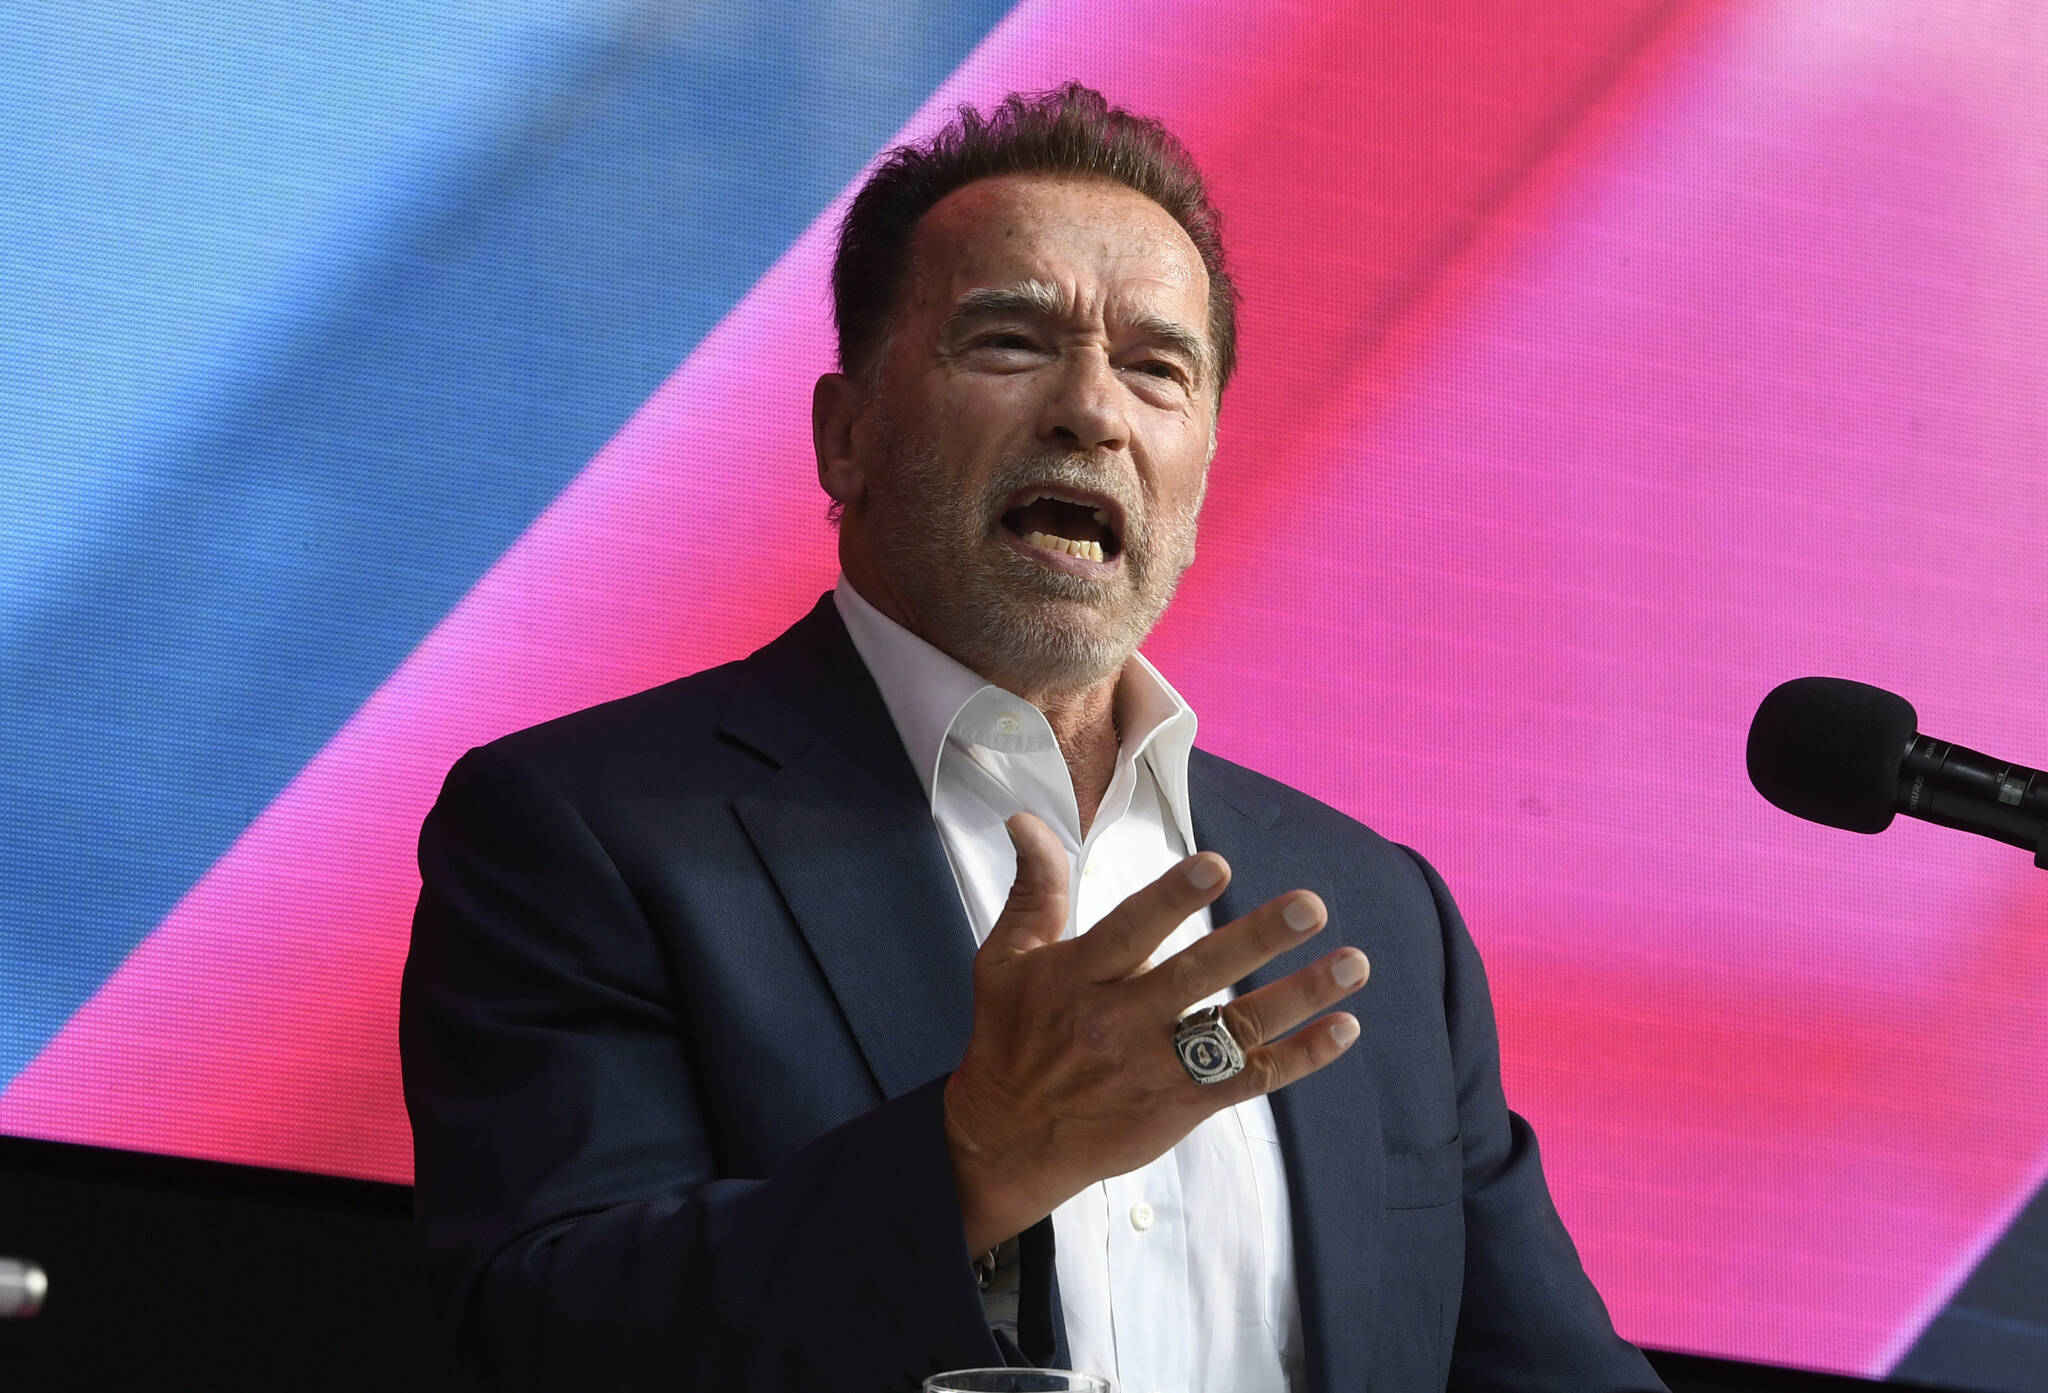 Arnold Schwarzenegger talks about Digital Sustainability during the Digital X conference in Cologne, Germany, Tuesday, Sept. 7, 2021. (Roberto Pfeil/dpa via AP)